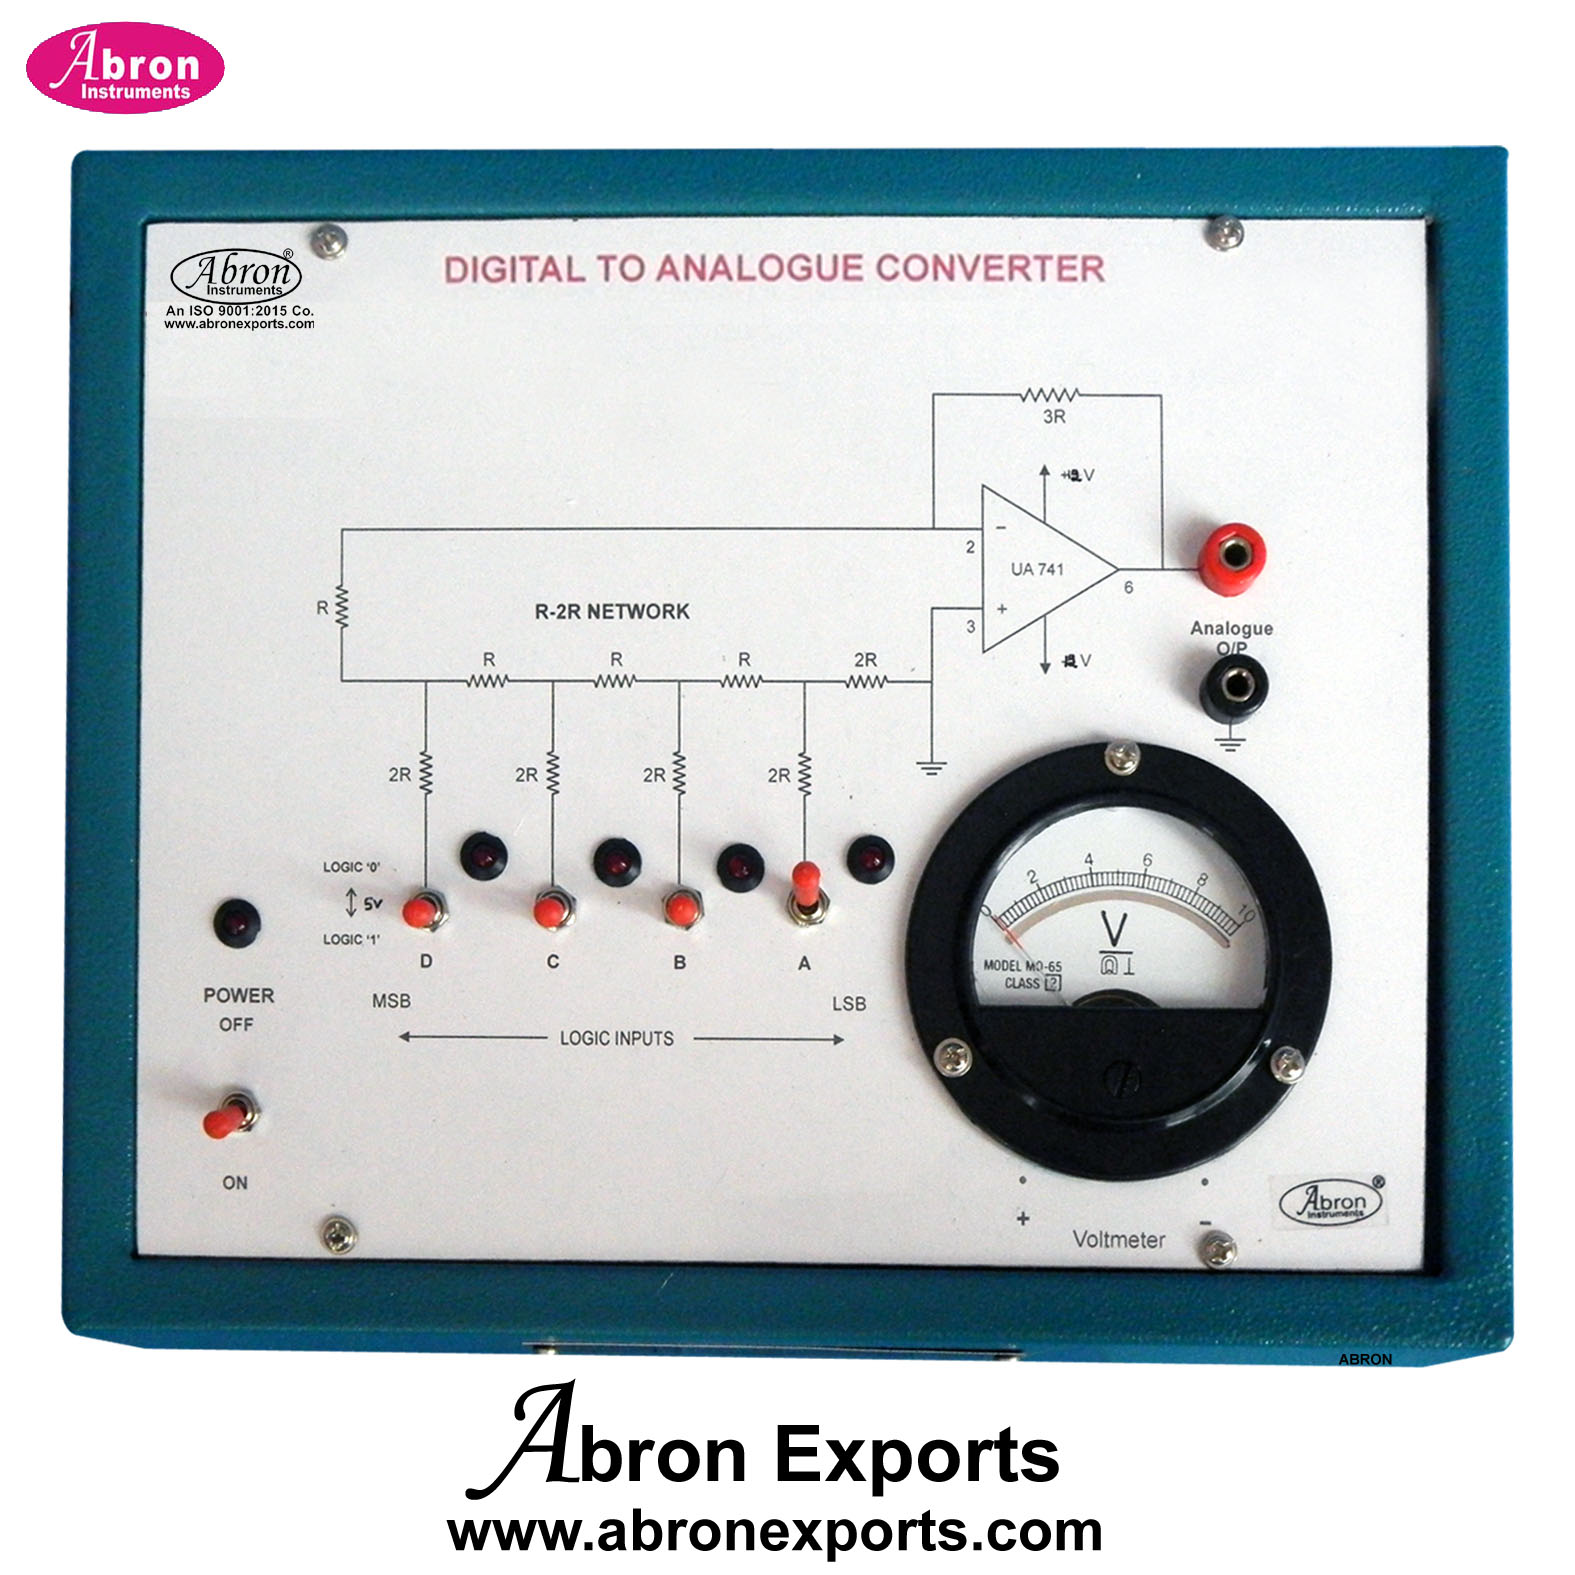 Digital To Analogue Converter D To A  Electronic Trainer With Led 1 Meter Power Supply Abron AE-1202DA1 